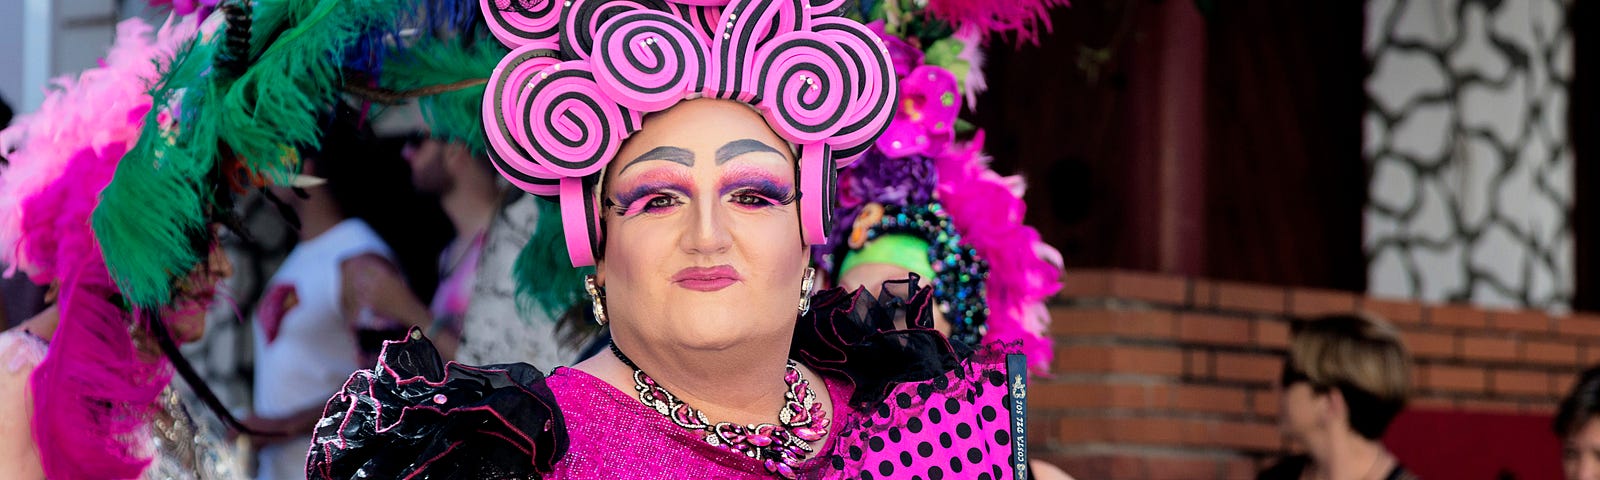 Drag Artist dressed in a flamboyant pink outfit with multi coloured feathers